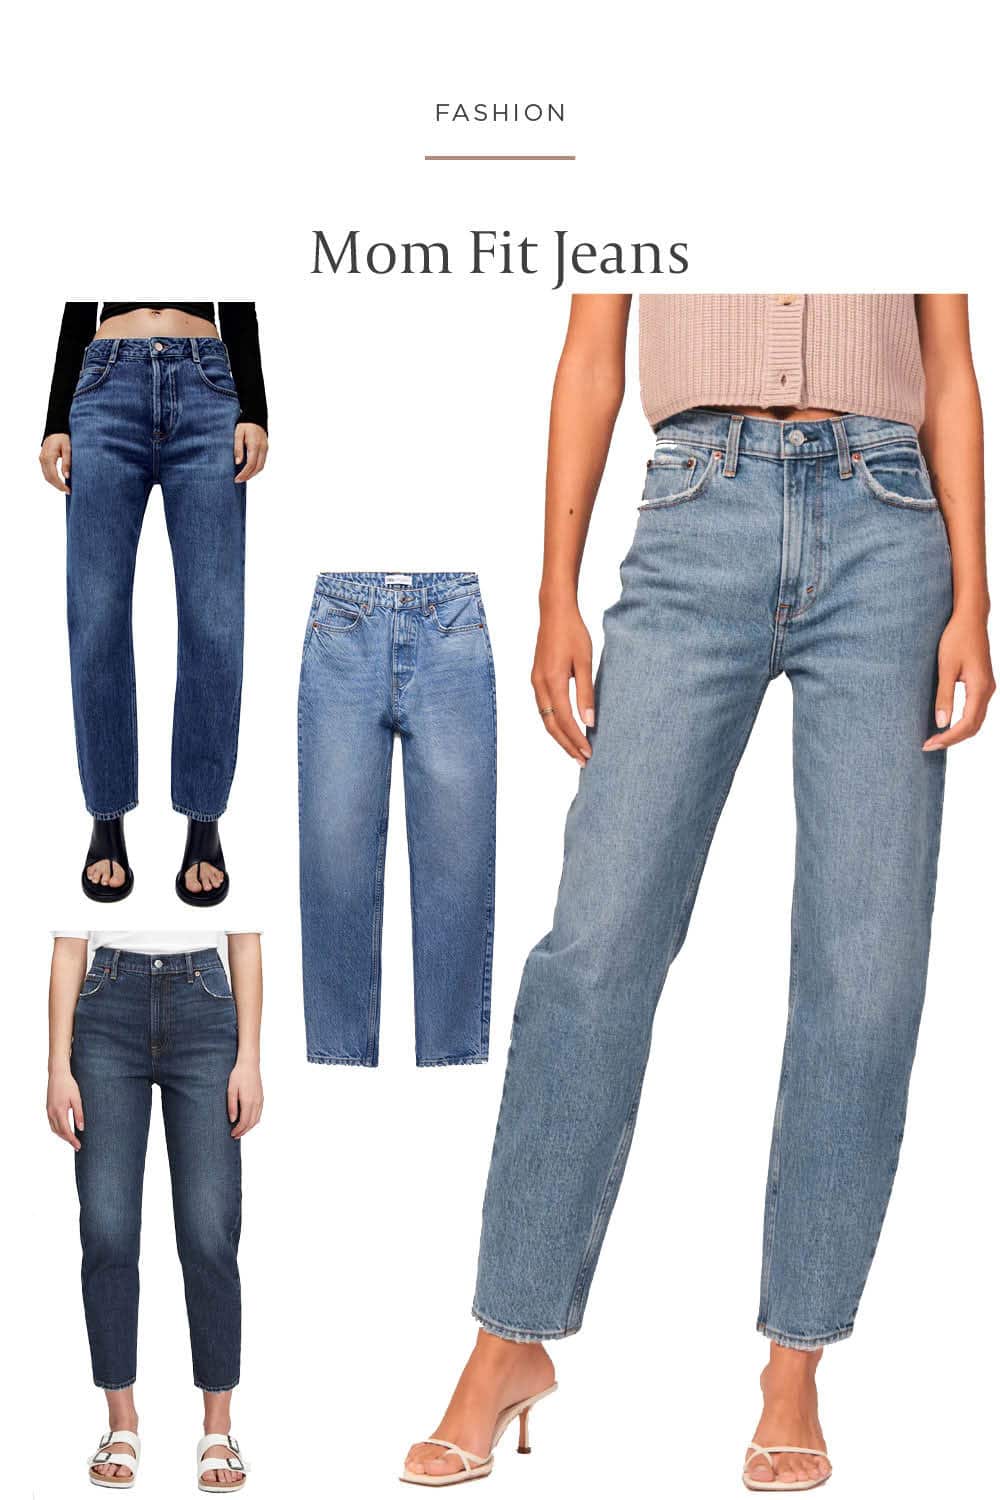 Trending jeans - the mom fit with a higher waist